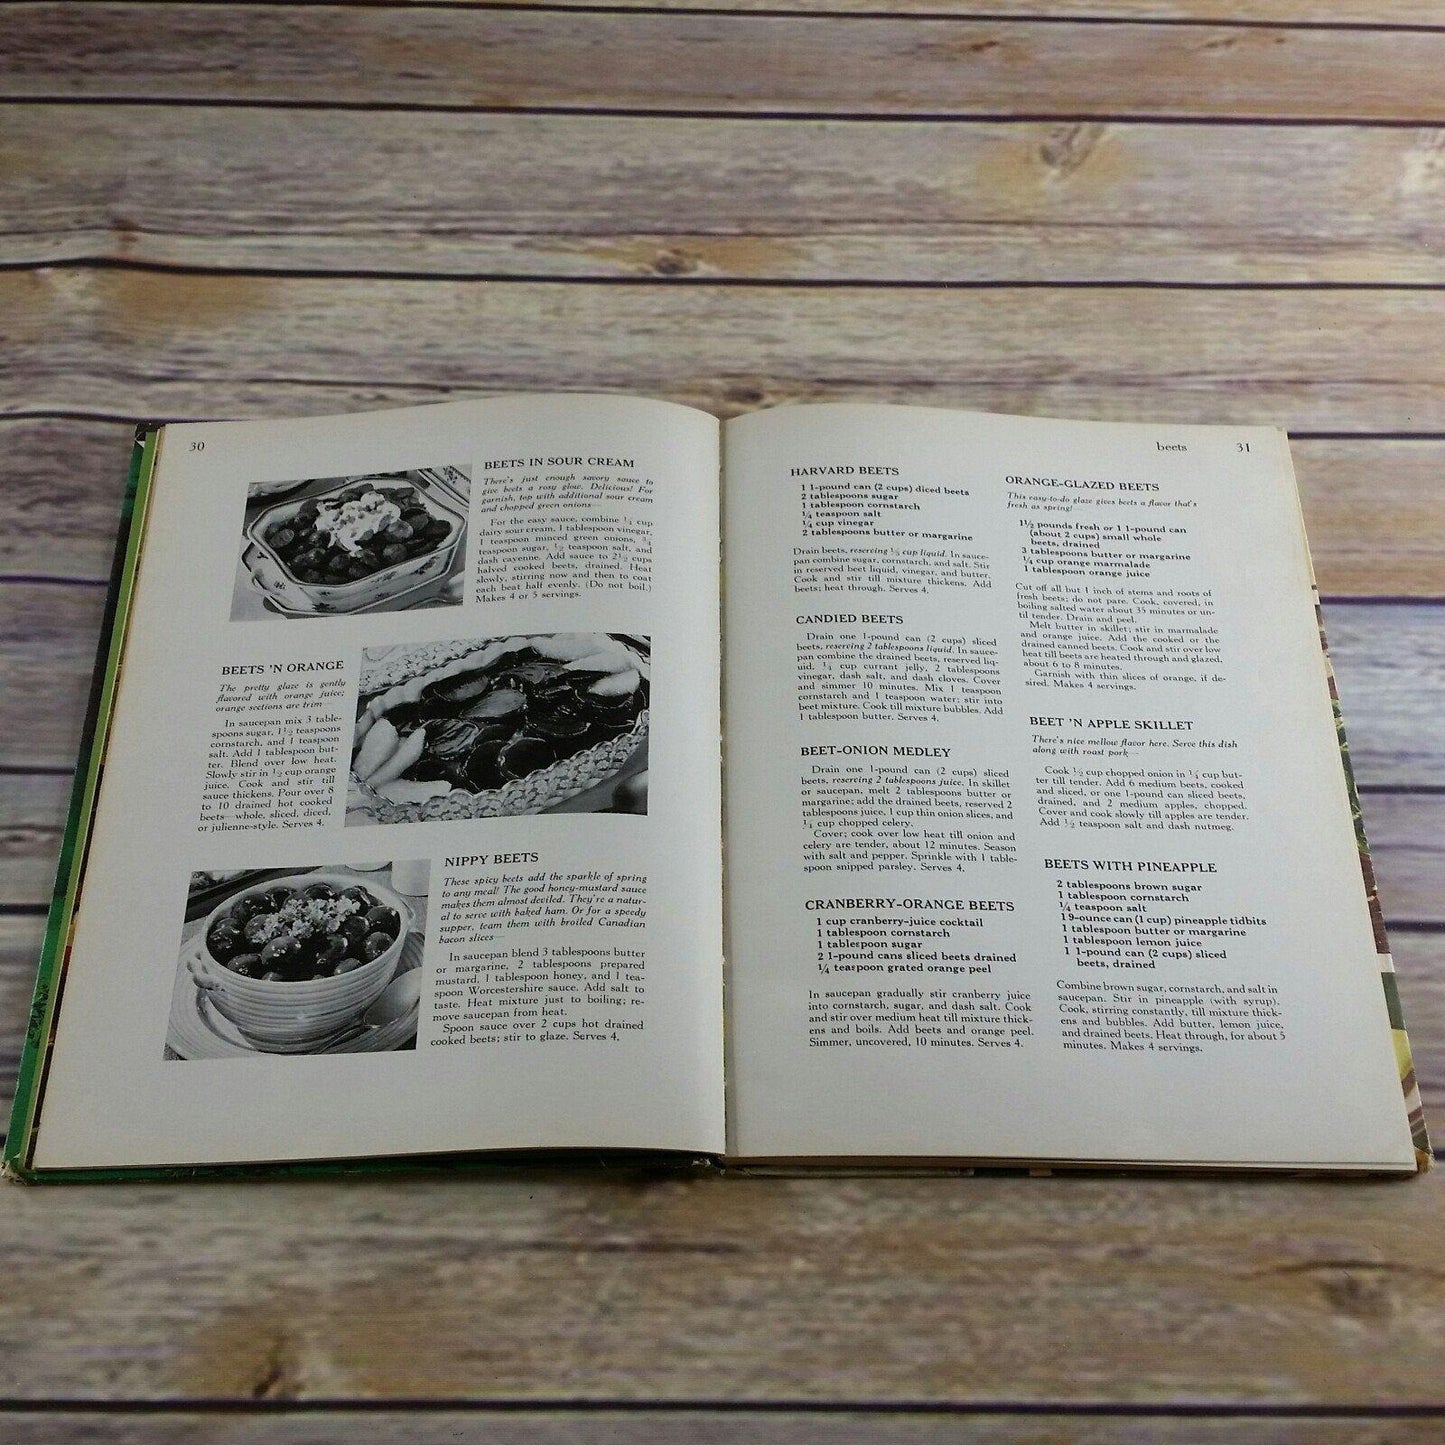 Vintage Cookbook Vegetable Recipes Better Homes and Gardens 1968 Third Printing Hardcover Canning and Freezing Soups Sauces Seasonings